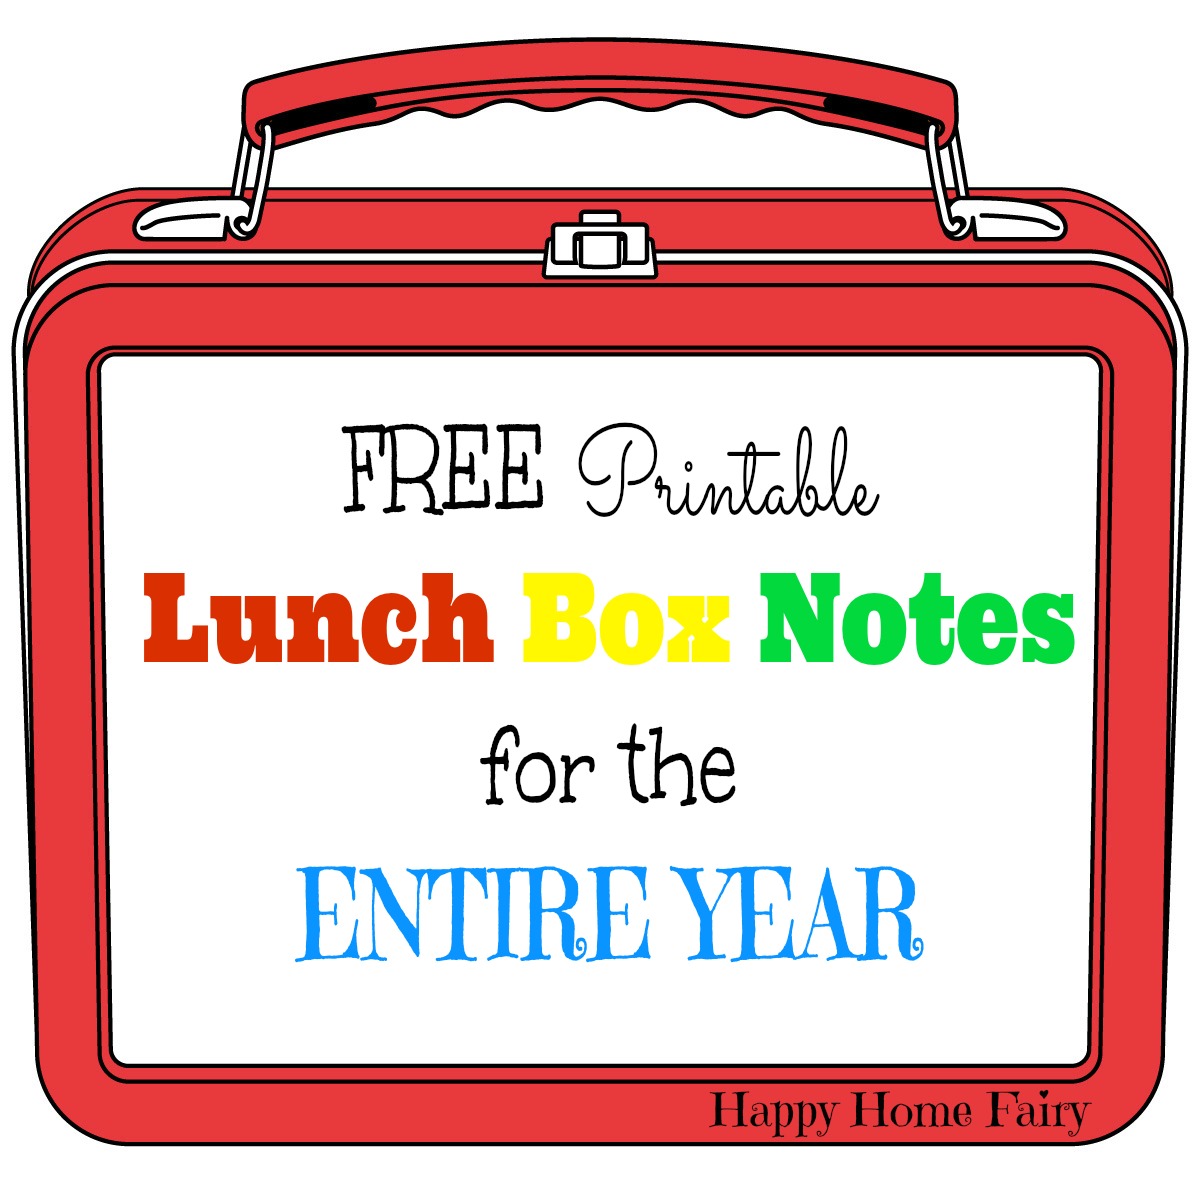 FREE Printable Lunch Box Notes for the ENTIRE YEAR - Happy Home Fairy1200 x 1200